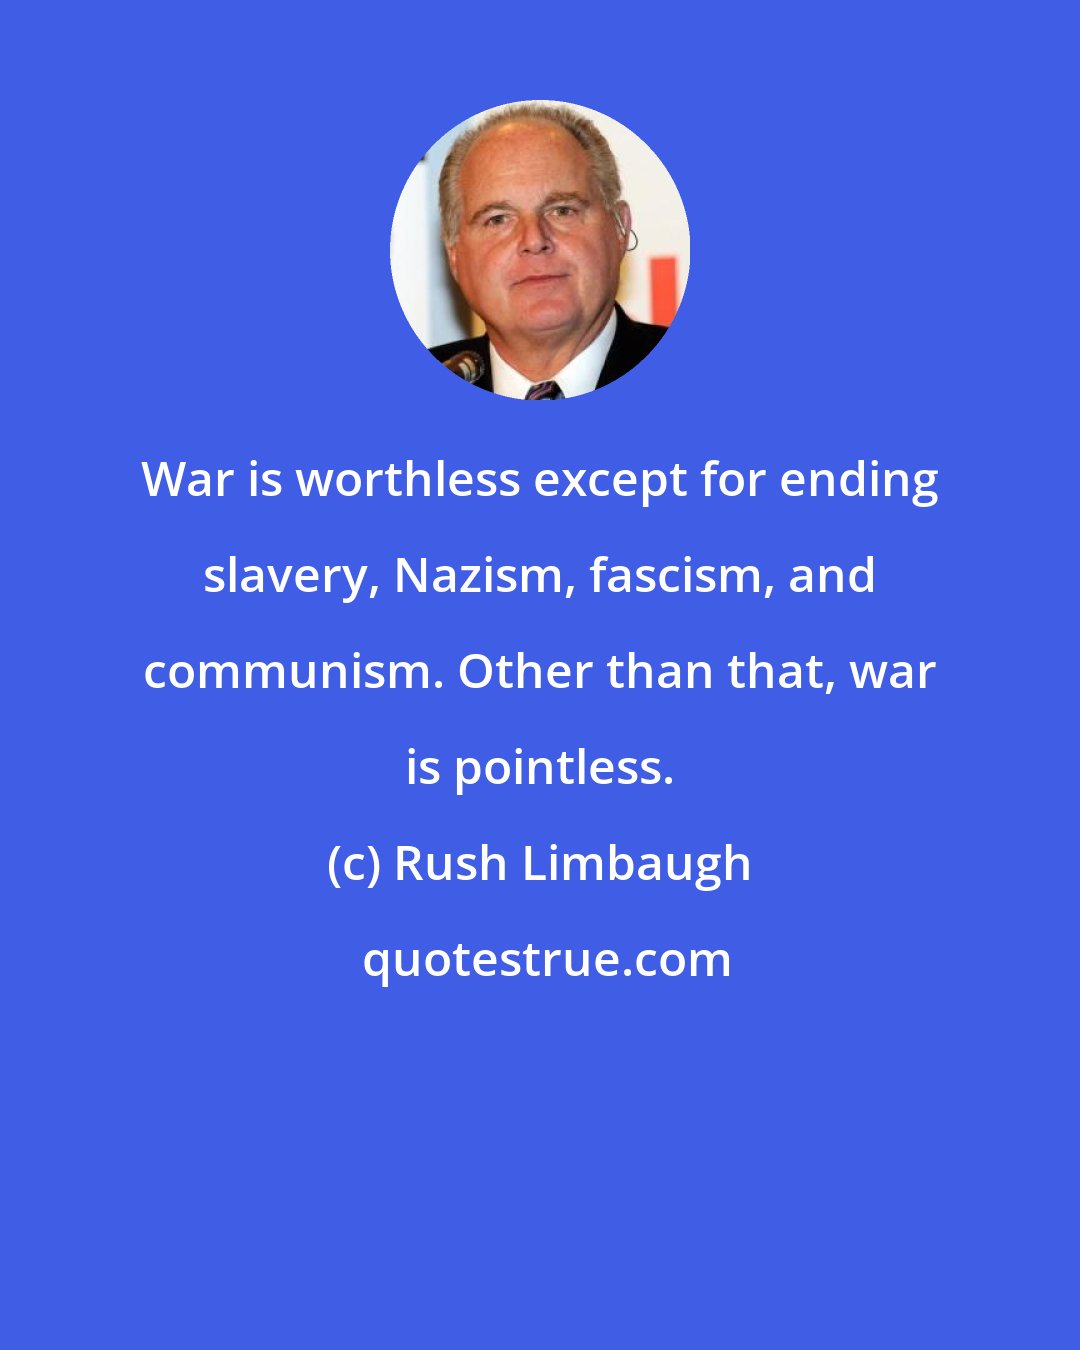 Rush Limbaugh: War is worthless except for ending slavery, Nazism, fascism, and communism. Other than that, war is pointless.